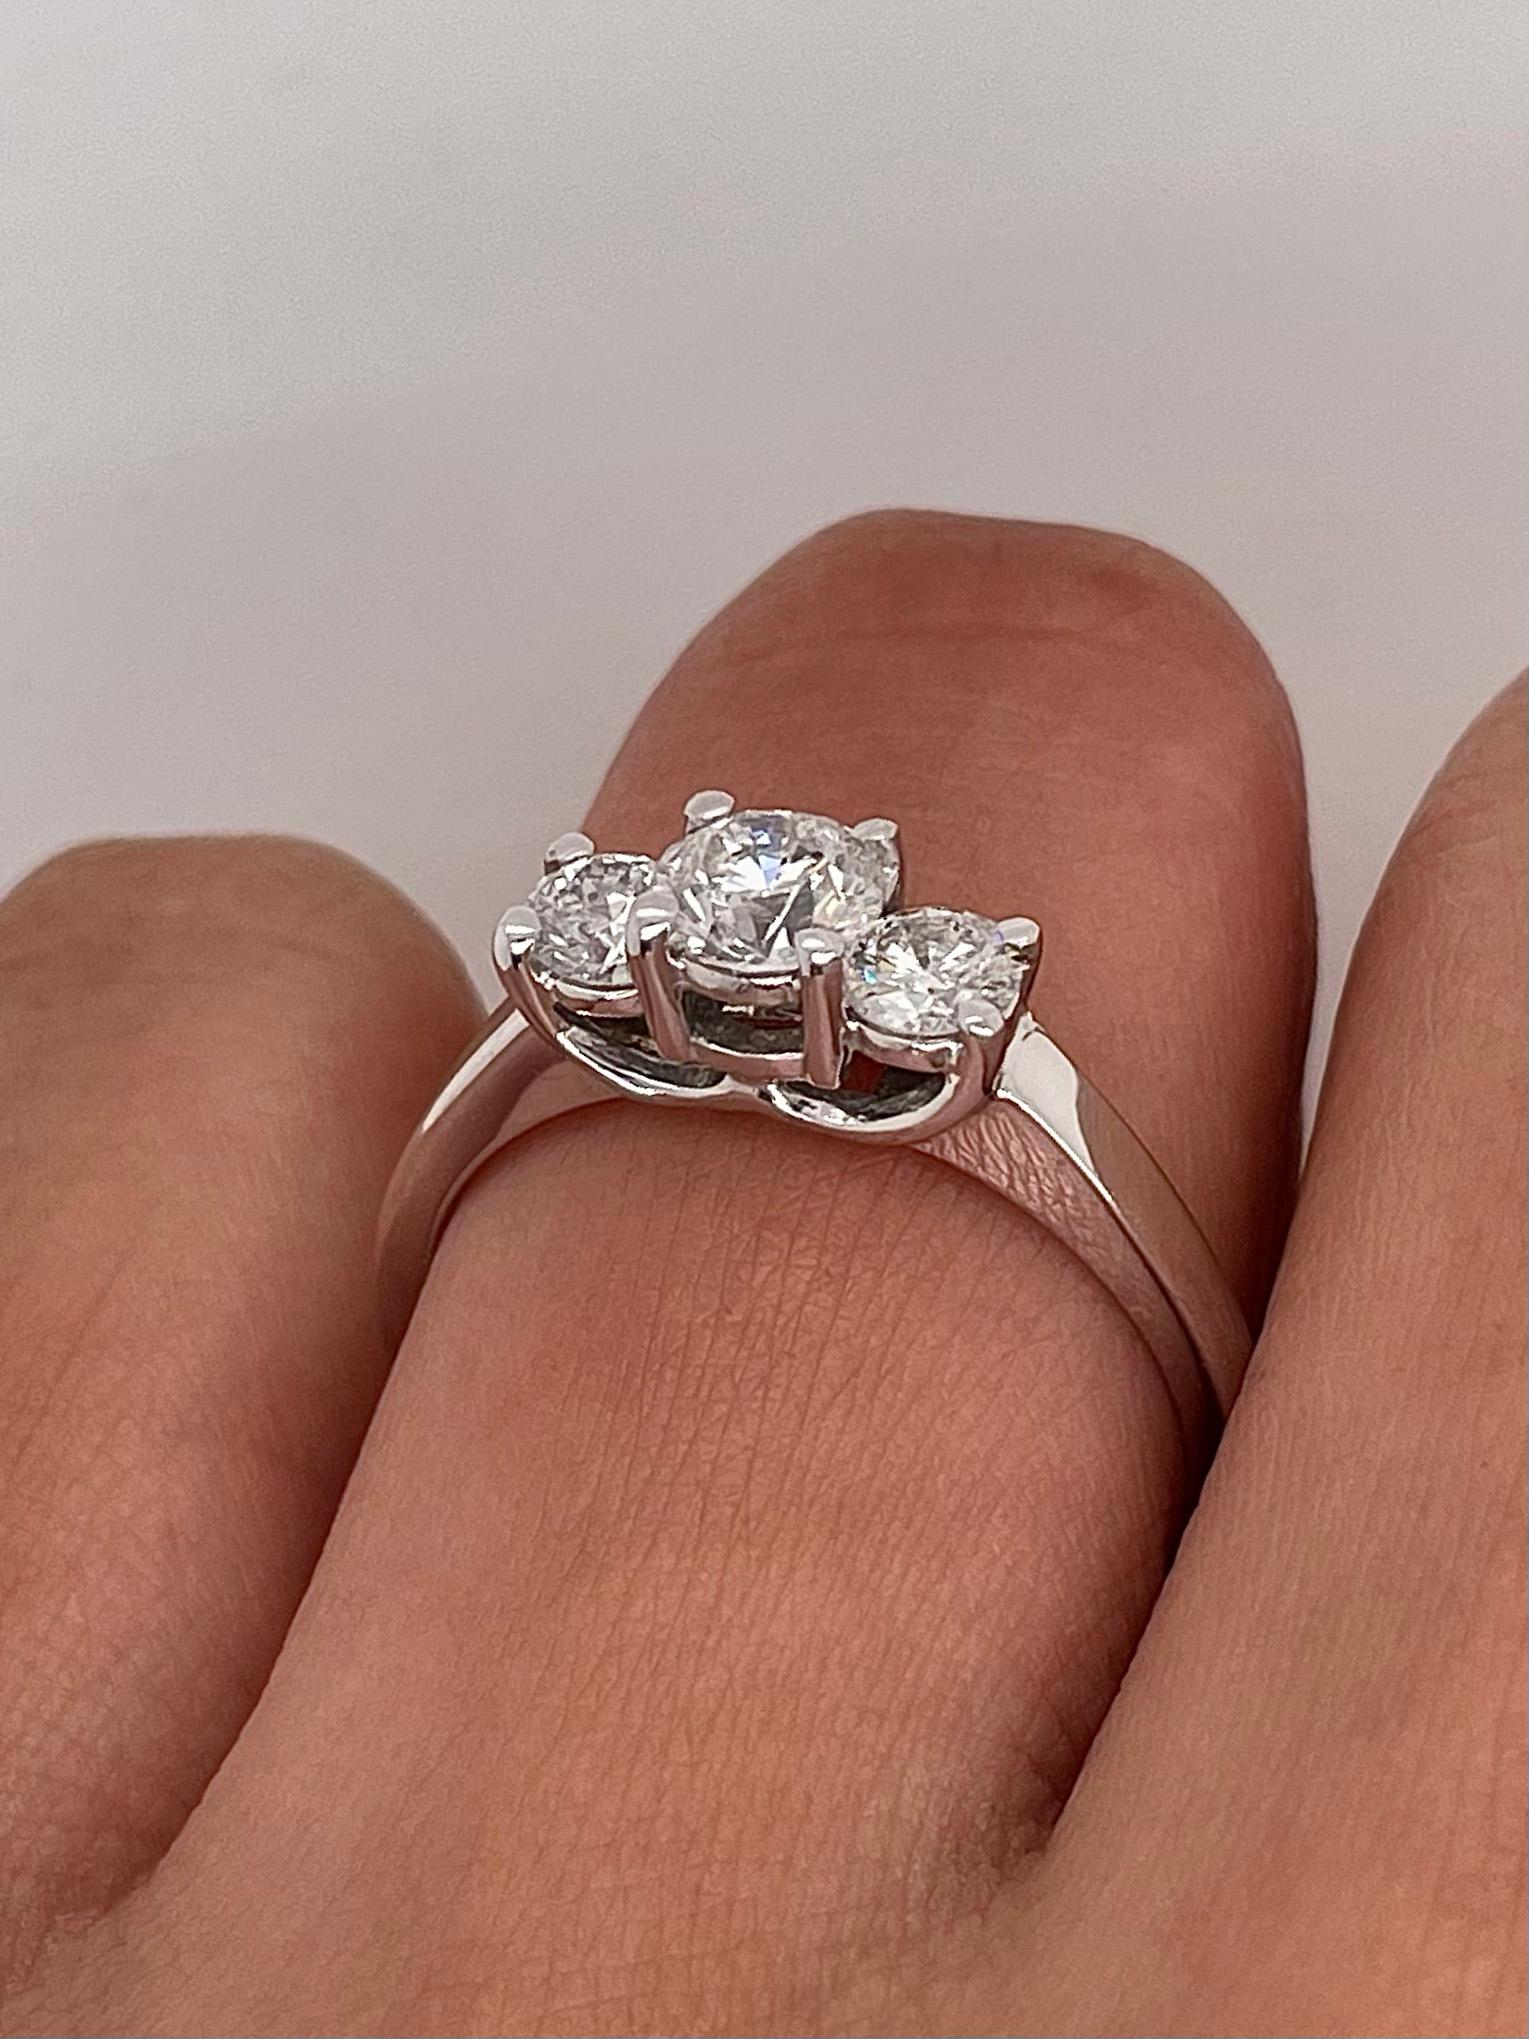 1.02 Carat Round Diamond Three Stone Engagement Ring F SI2
-Metal: 14K White Gold
-0.53 Carat Round Center Stone, F Color, SI2 Clarity
-0.49 Carat Side Stones, F Color, SI1/SI2 Clarity

-Ring Size: 8.5